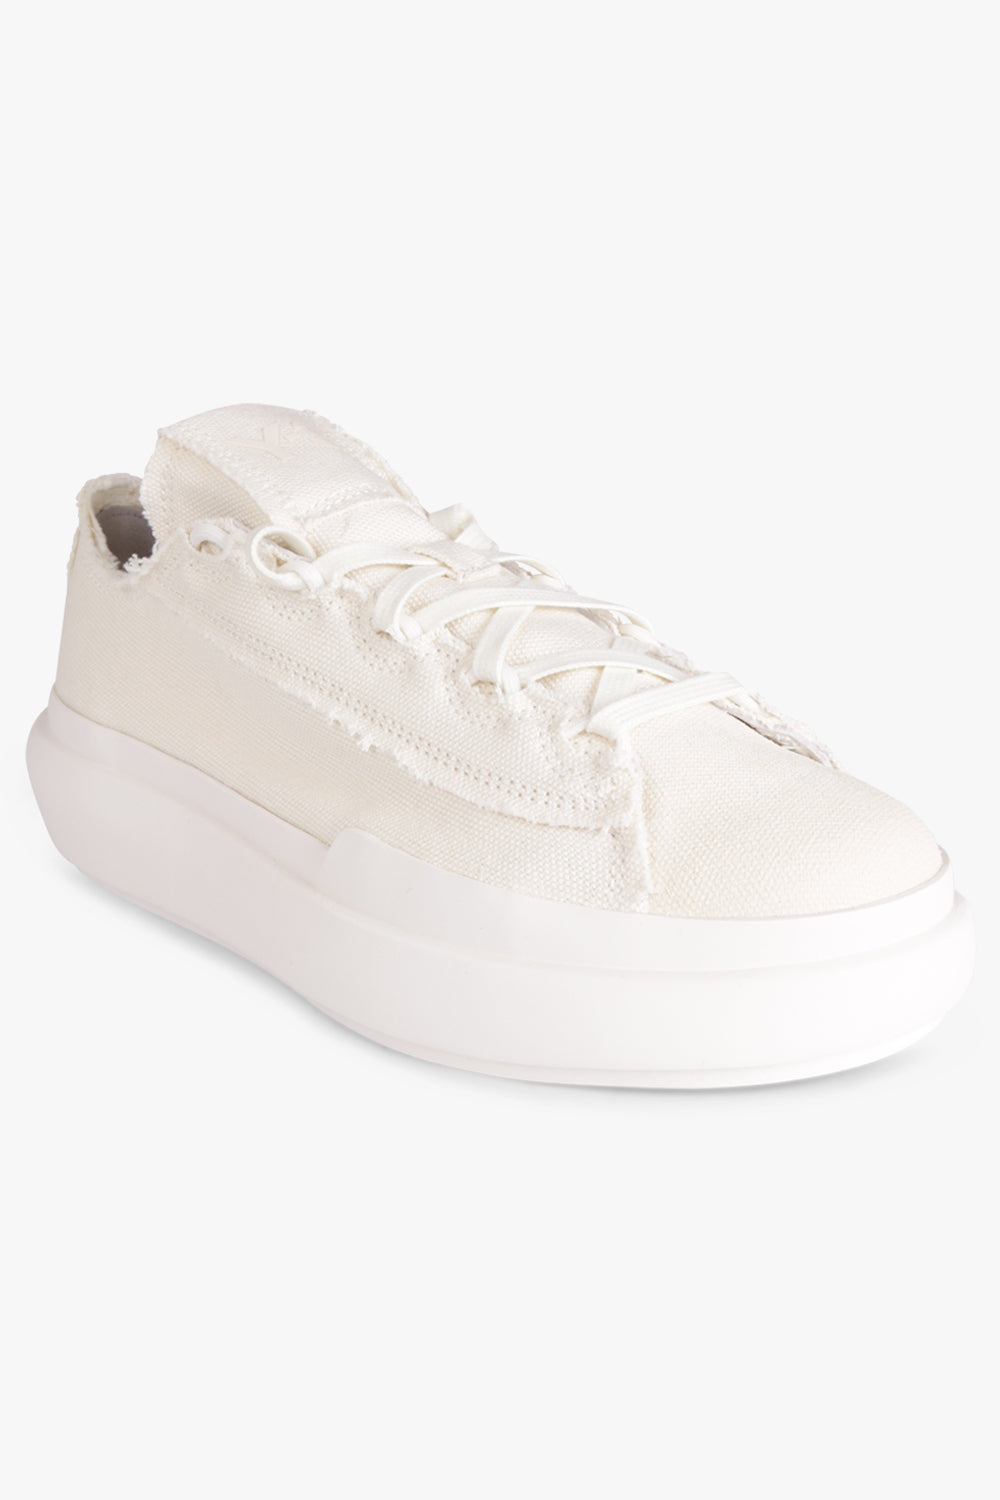 Y-3 SHOES Nizza Low Leather Sneaker | Off White